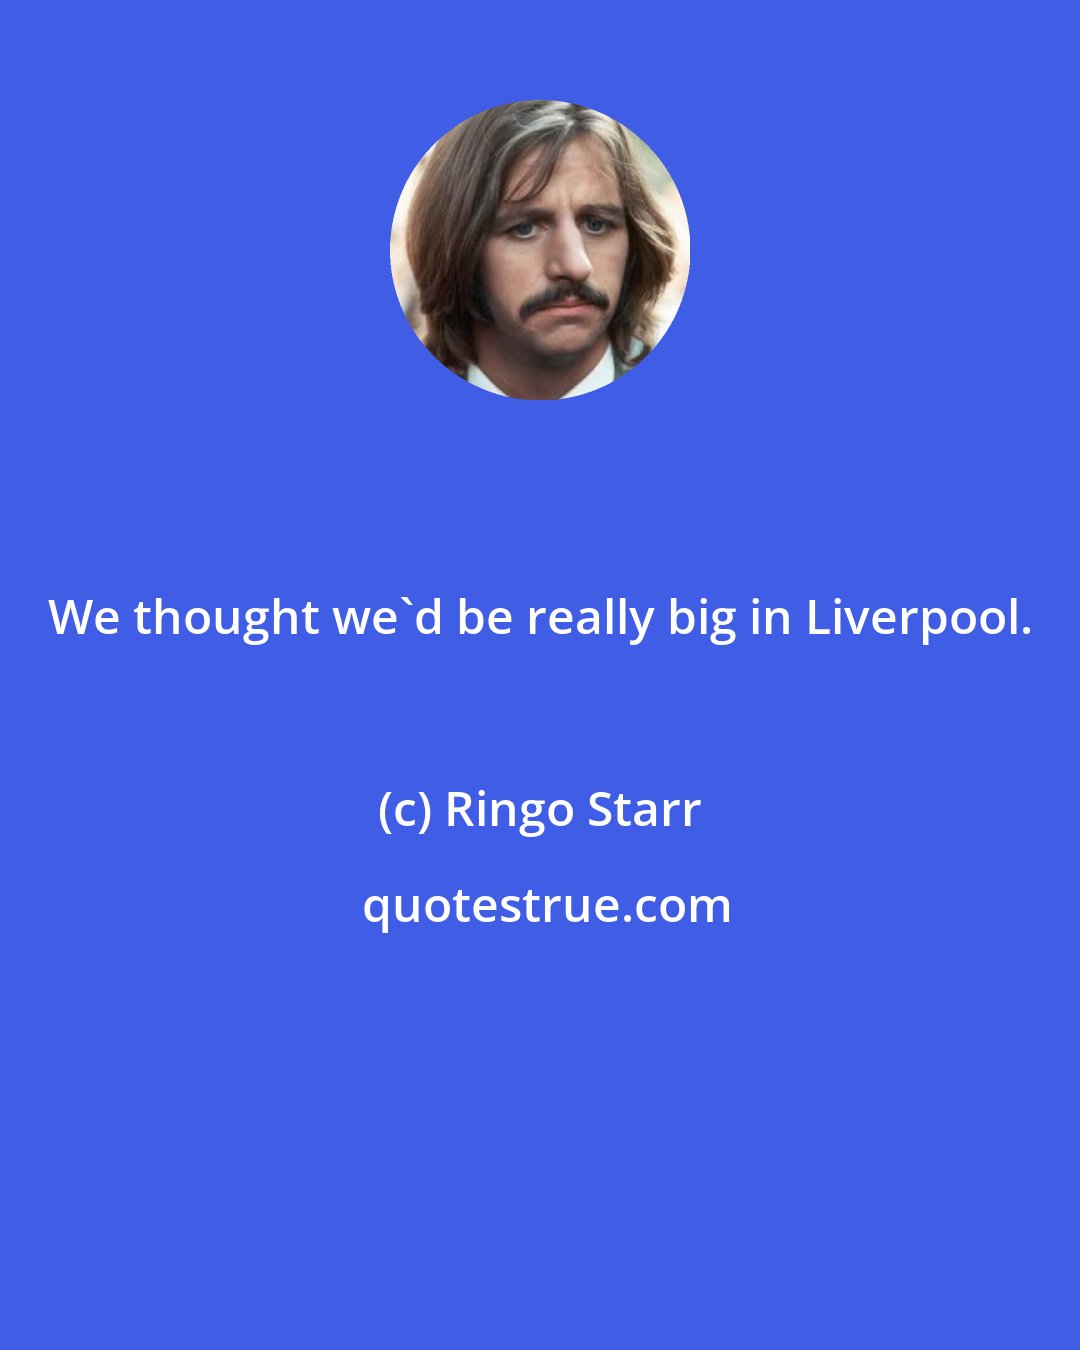 Ringo Starr: We thought we'd be really big in Liverpool.